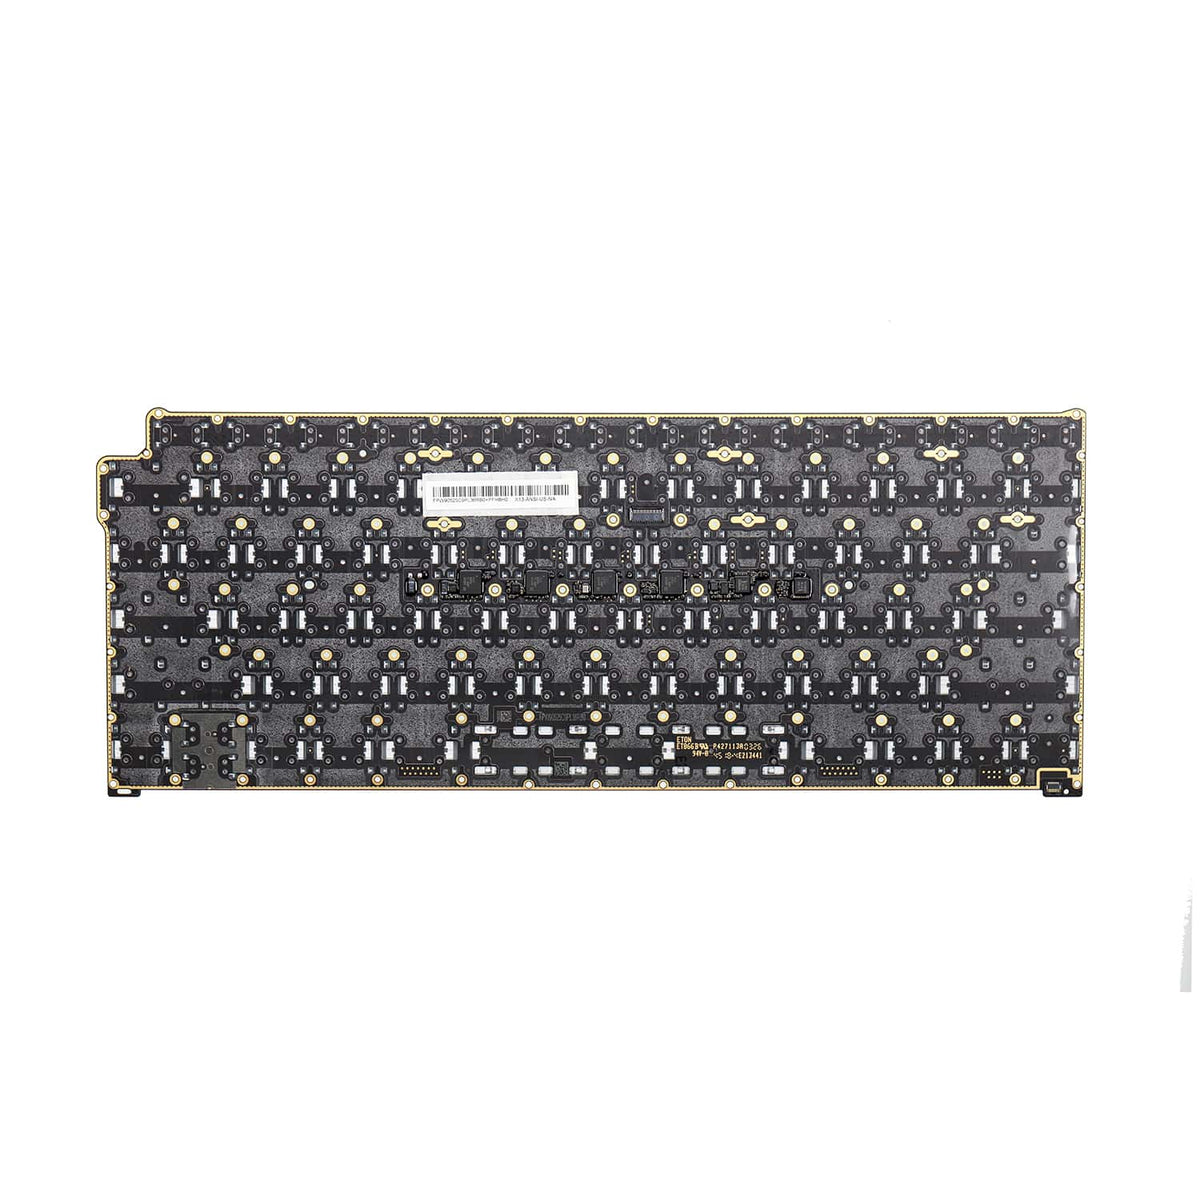 KEYBOARD (US ENGLISH) FOR MACBOOK AIR A1932 LATE 2018 -MID 2019